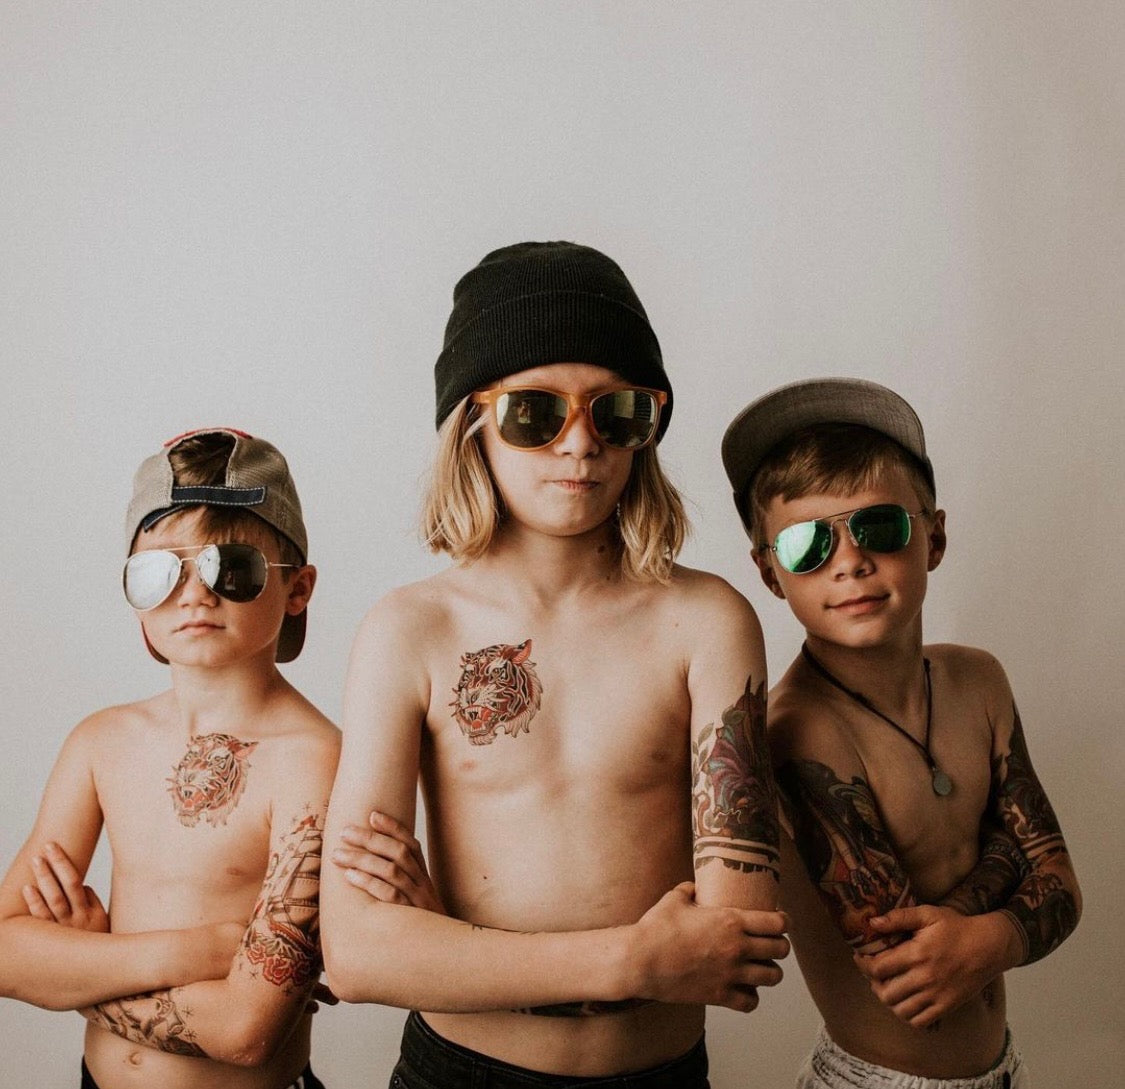 Tatted Up & Ready to Rock: Get Your Temporary Sleeve Tattoos On!